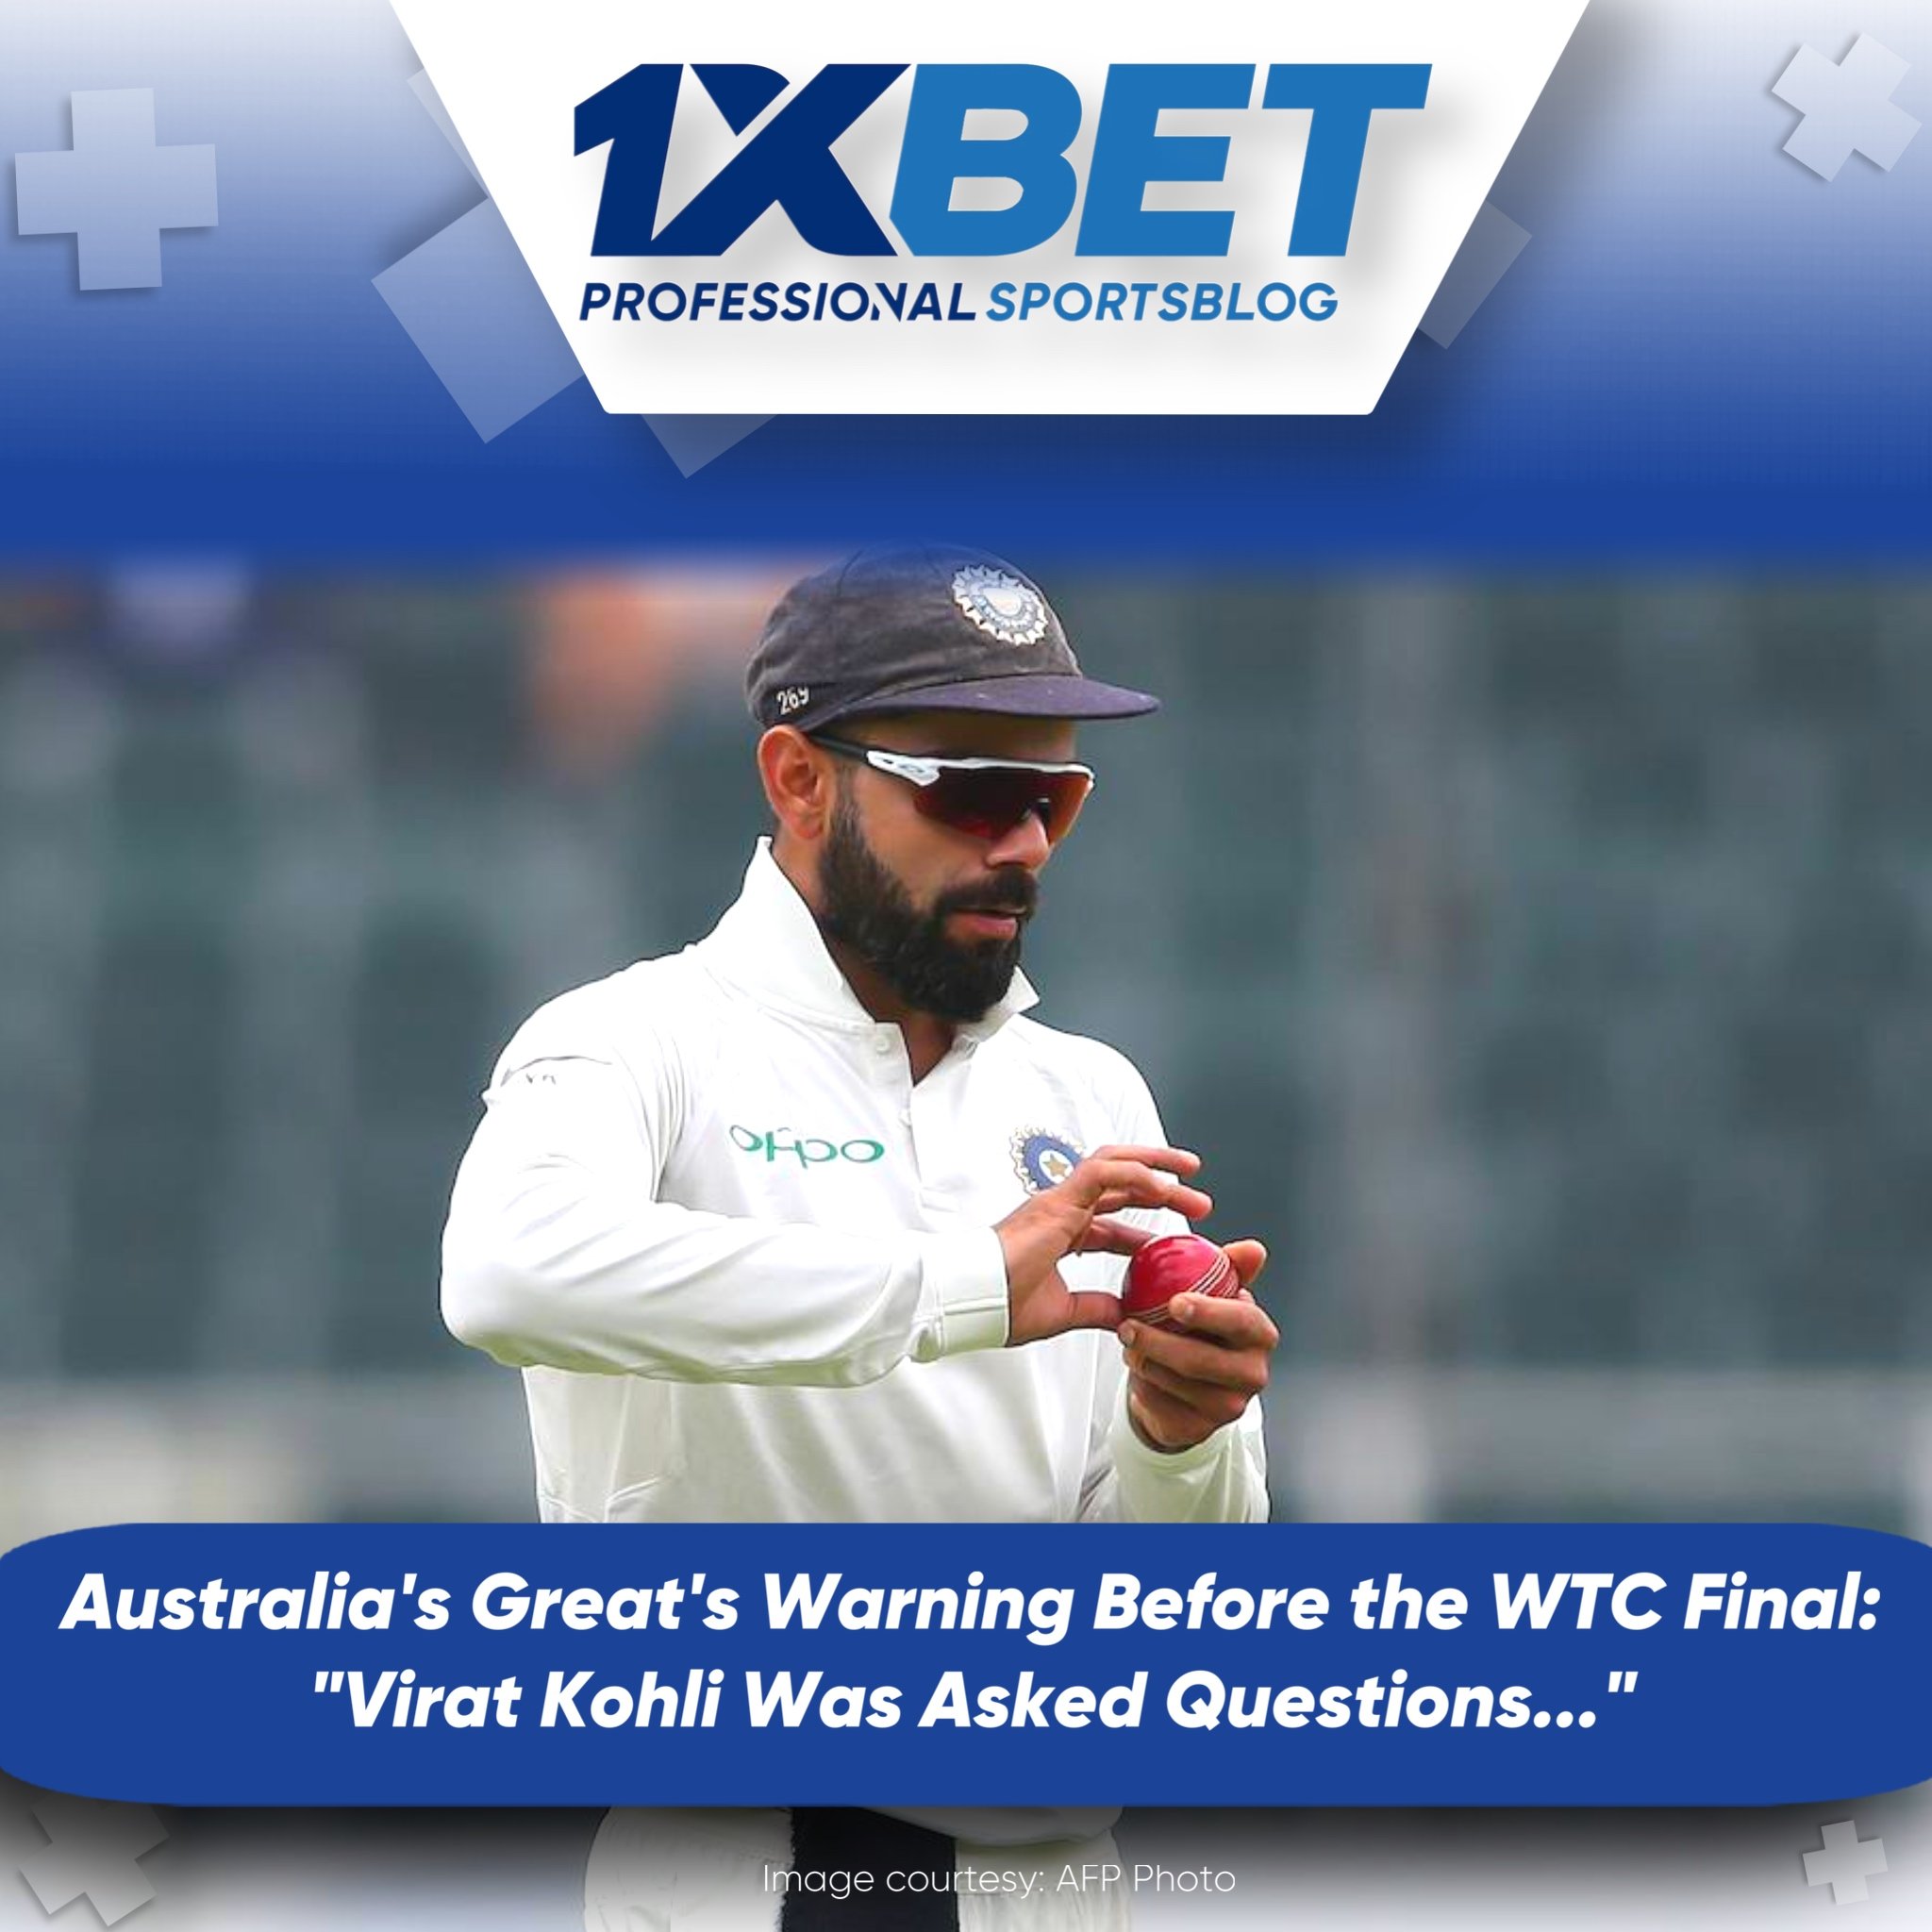 Australia's Great's Warning Before the WTC Final: "Virat Kohli Was Asked Questions..."